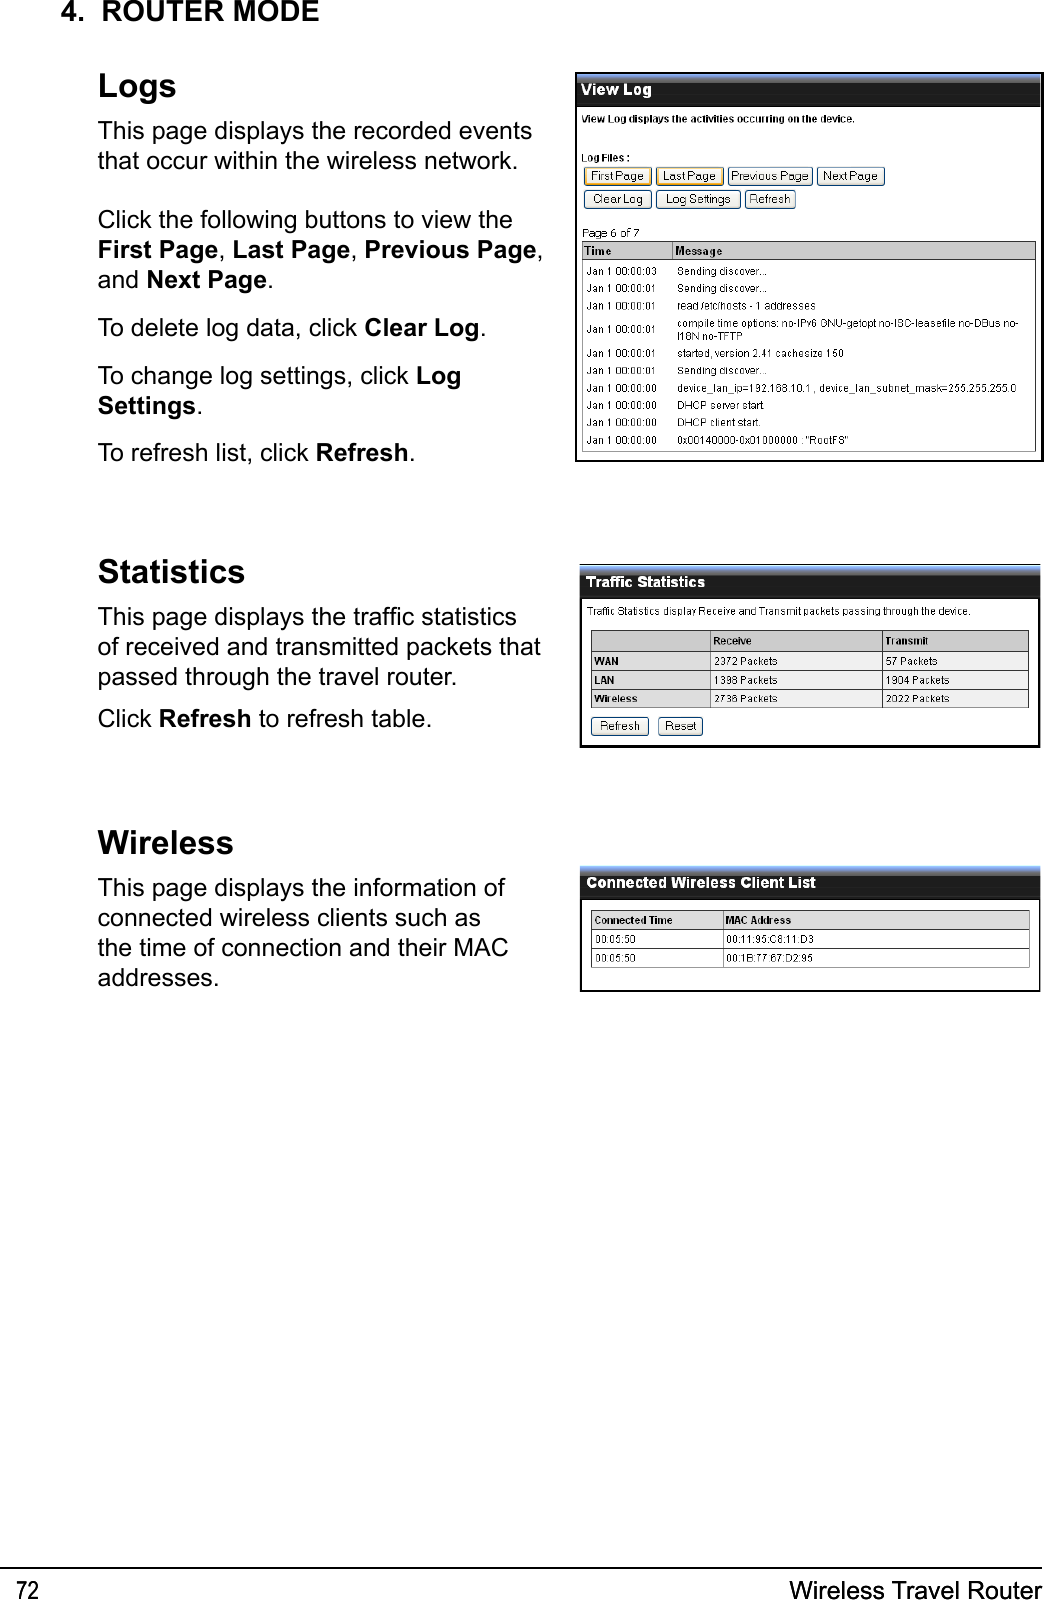 Wireless Travel Router72 Wireless Travel Router724.  ROUTER MODELogsThis page displays the recorded events that occur within the wireless network.Click the following buttons to view the First Page, Last Page, Previous Page, and Next Page.To delete log data, click Clear Log.To change log settings, click Log Settings.To refresh list, click Refresh.StatisticsThis page displays the trafc statistics of received and transmitted packets that passed through the travel router.Click Refresh to refresh table.WirelessThis page displays the information of connected wireless clients such as the time of connection and their MAC addresses.